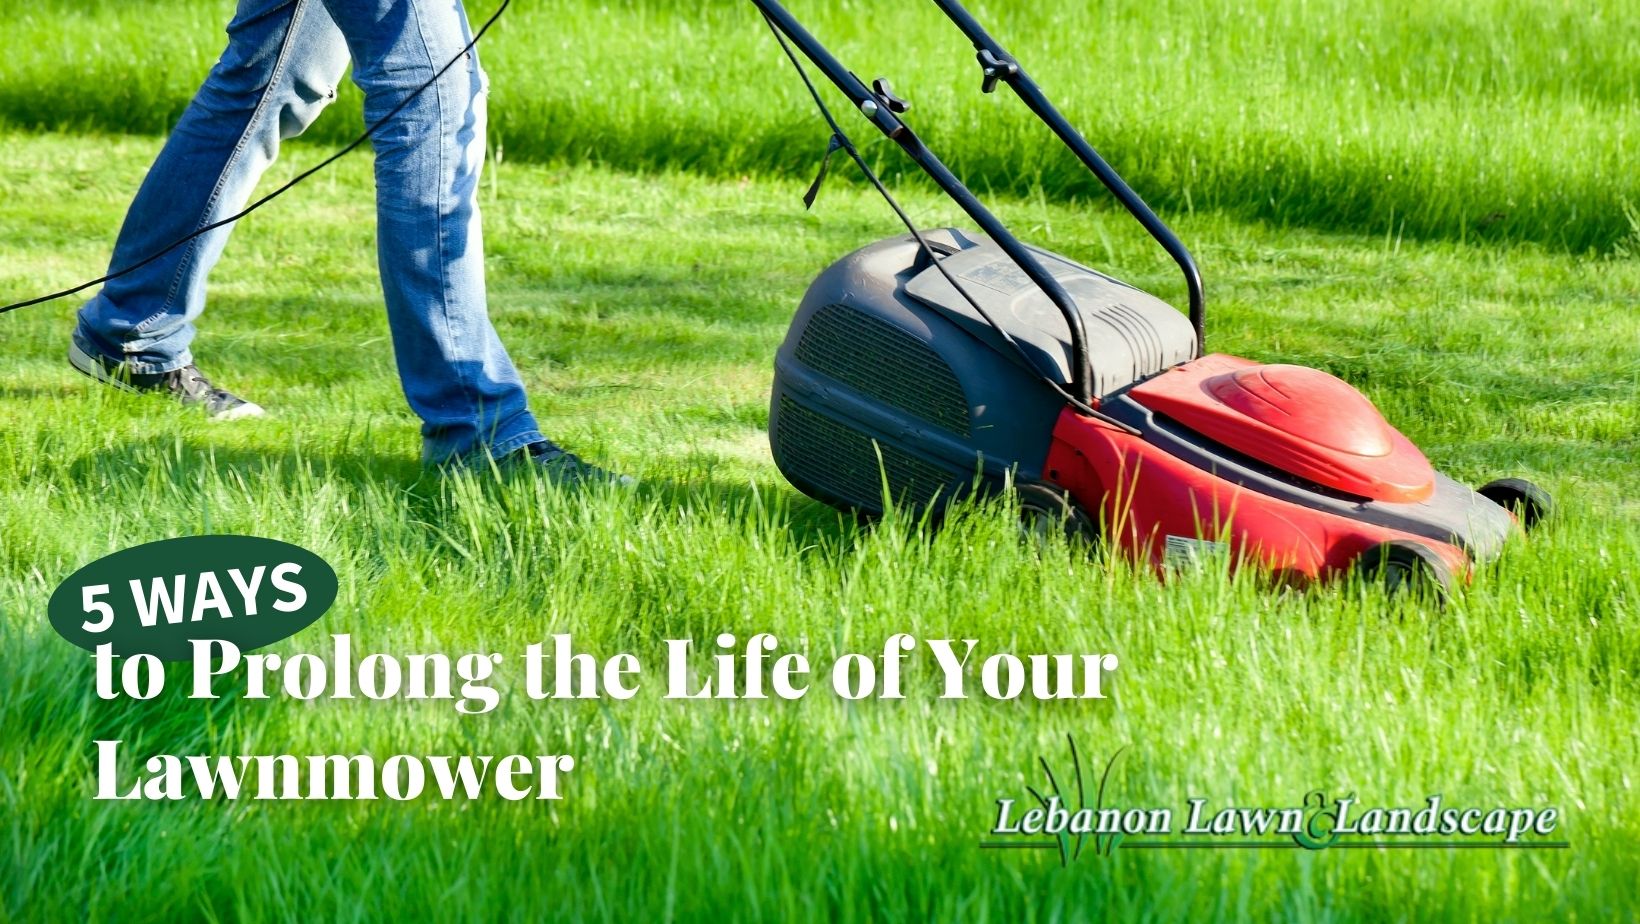 A guy mowing is lawn